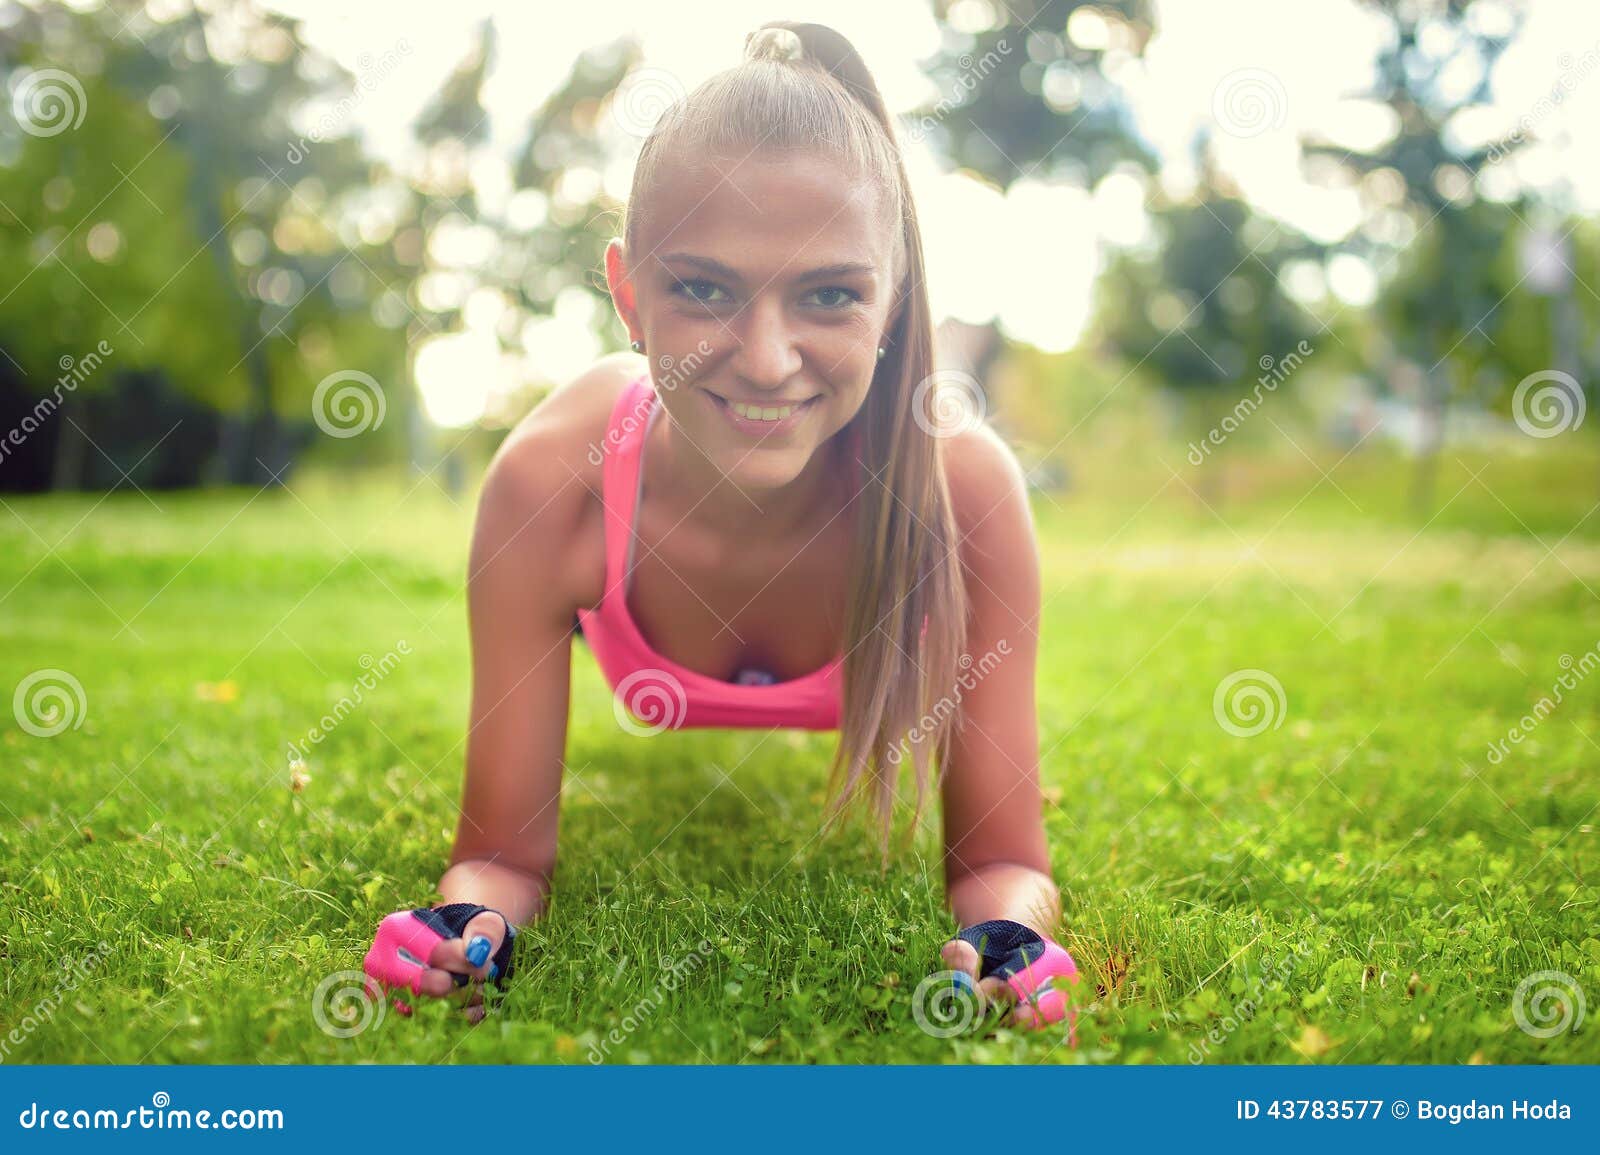 happy, beautiful blonde girl doing abs and isometry on grass